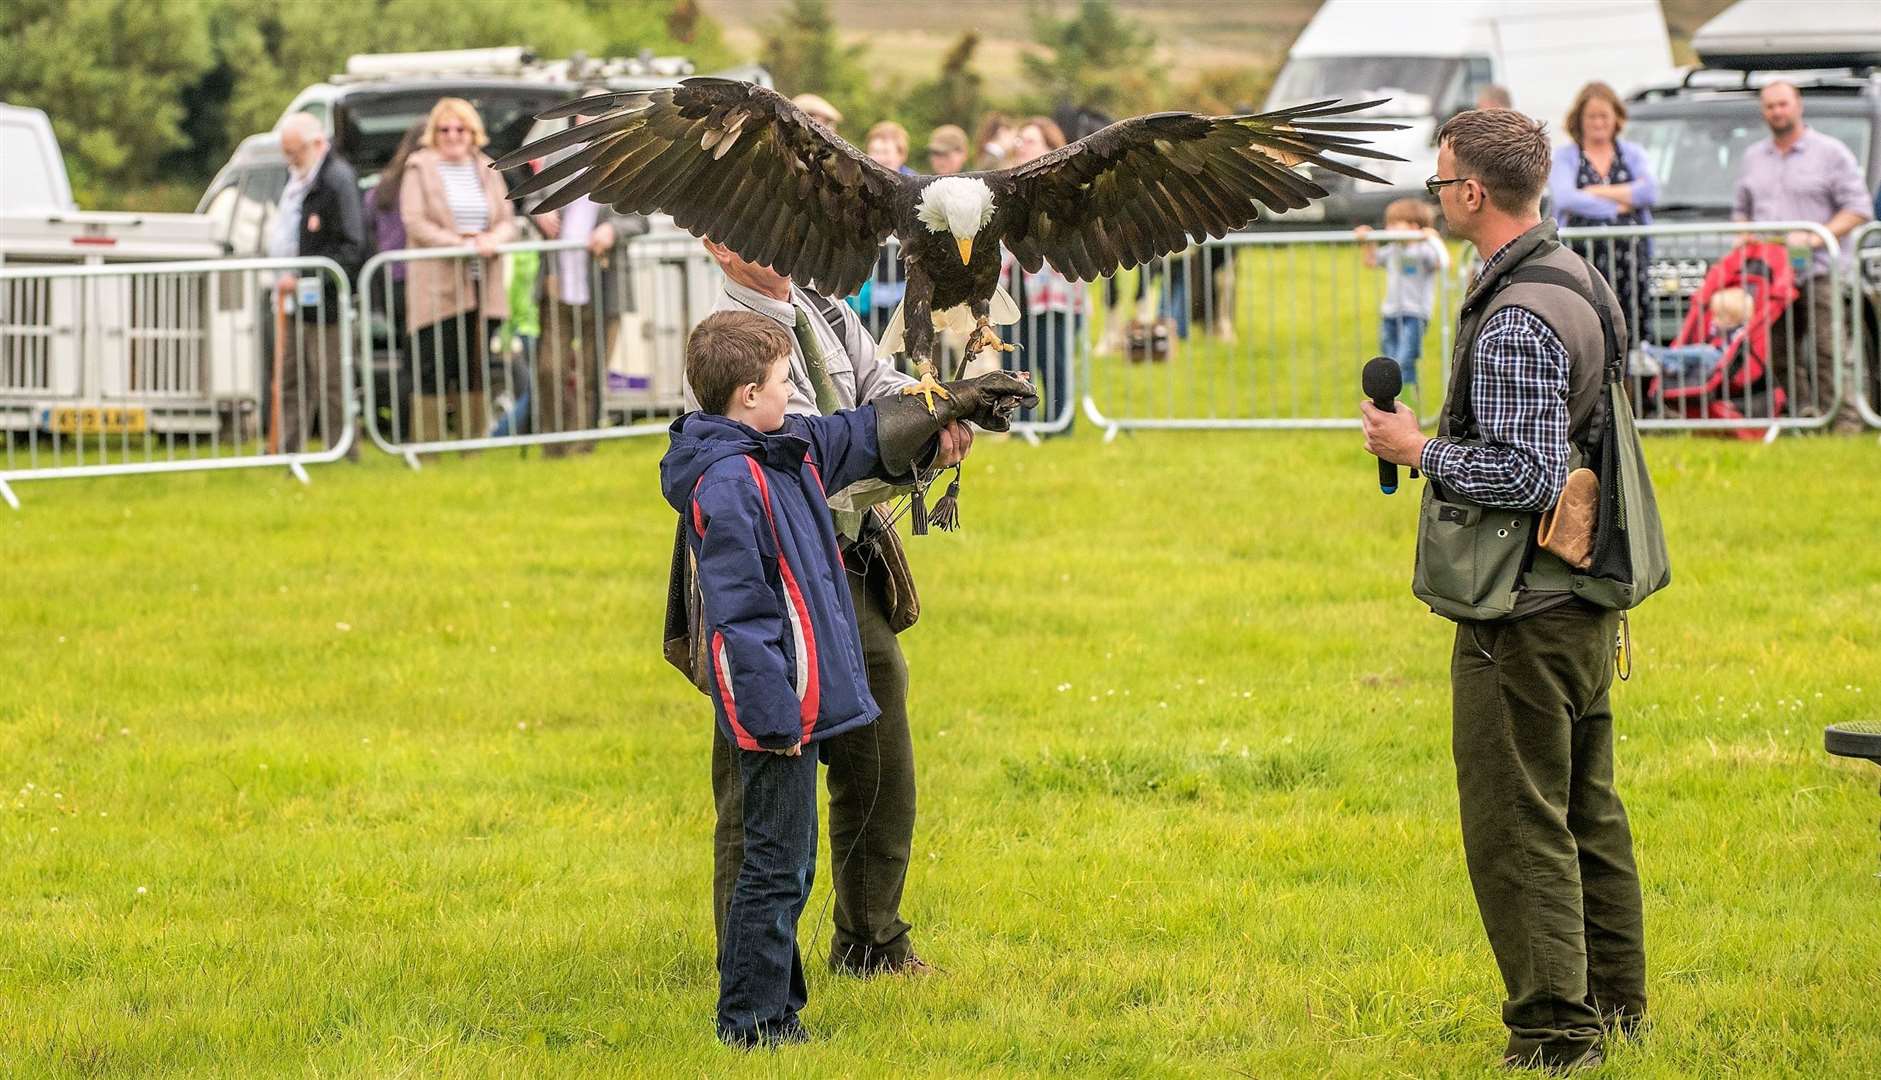 There are special displays with birds of prey. Picture: Wendy Sutherland